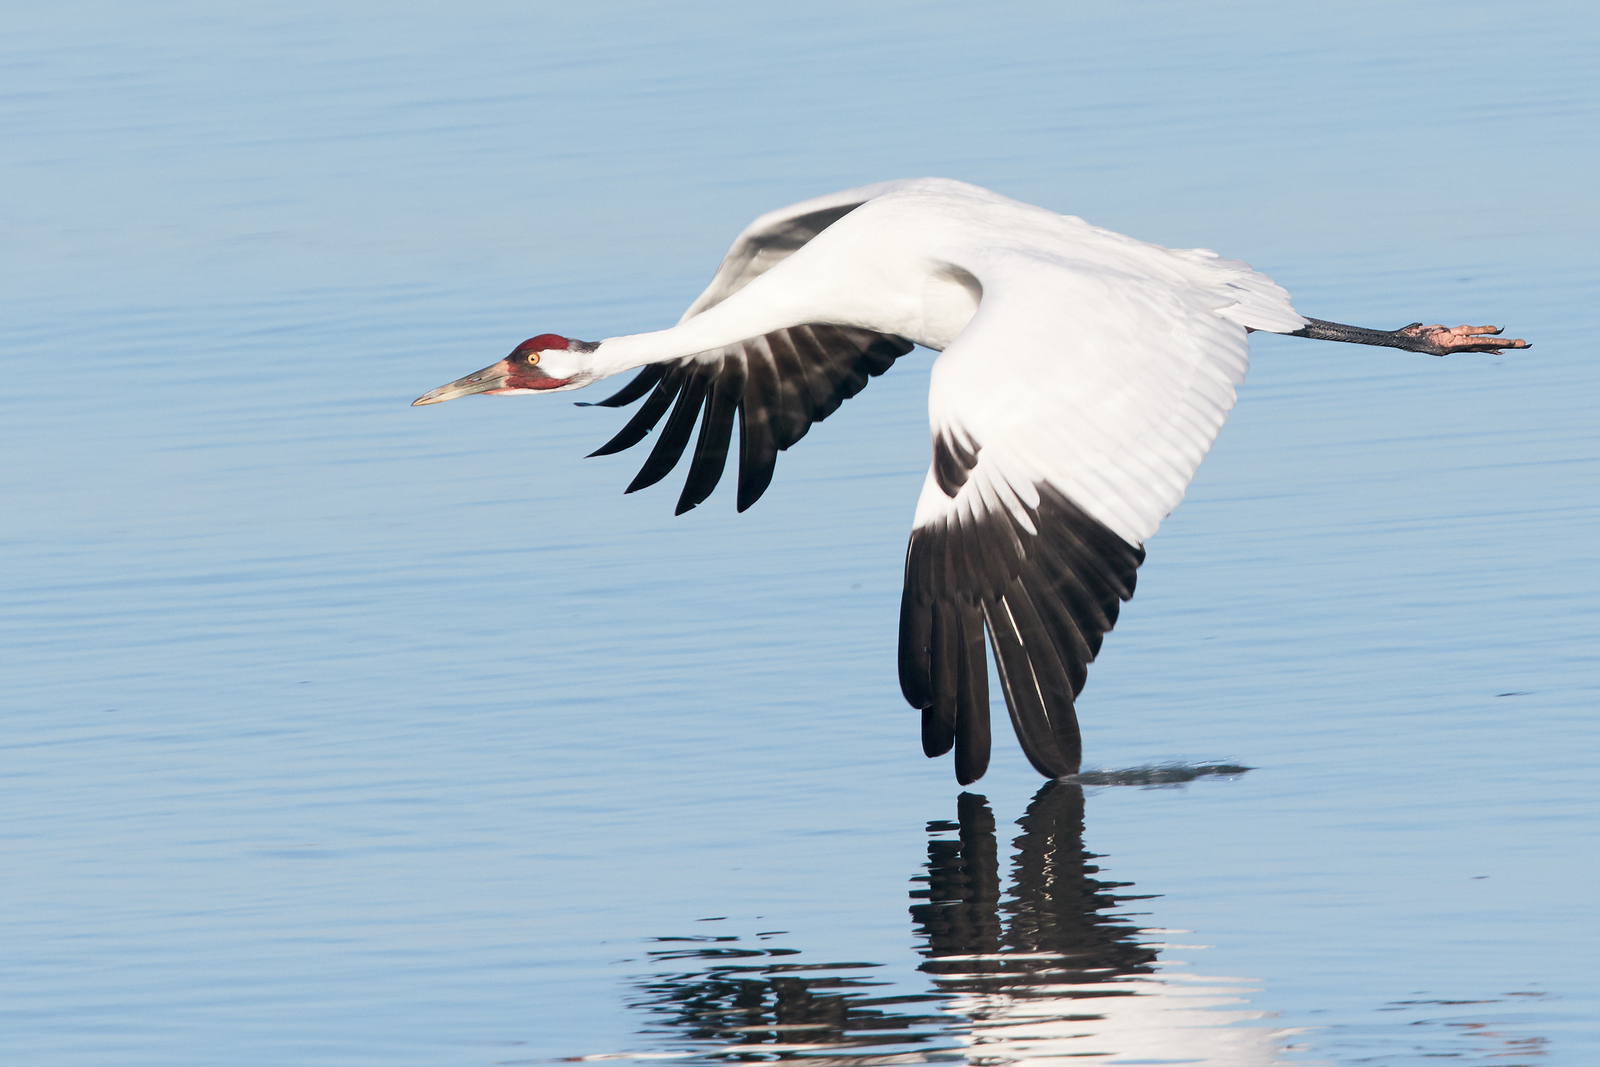 Endangered Whooping Crane Flying over the water with Reflection and Wing Touching the Water